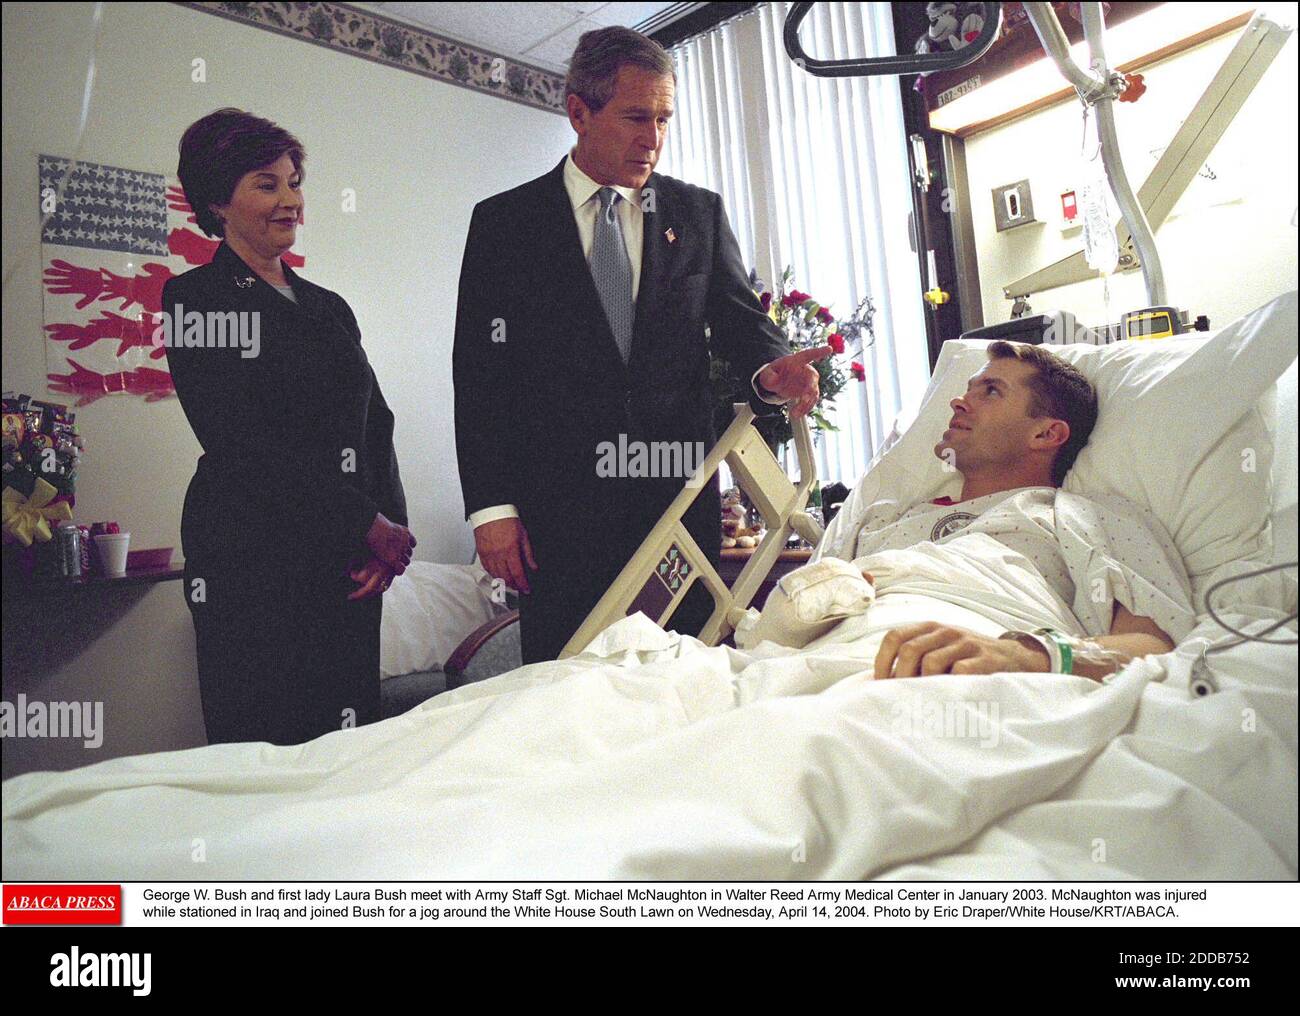 NO FILM, NO VIDEO, NO TV, NO DOCUMENTARY - George W. Bush and first lady Laura Bush meet with Army Staff Sgt. Michael McNaughton in Walter Reed Army Medical Center in January 2003. McNaughton was injured while stationed in Iraq and joined Bush for a jog around the White House South Lawn on Wednesday, April 14, 2004. Photo by Eric Draper/White House/KRT/ABACA. Stock Photo